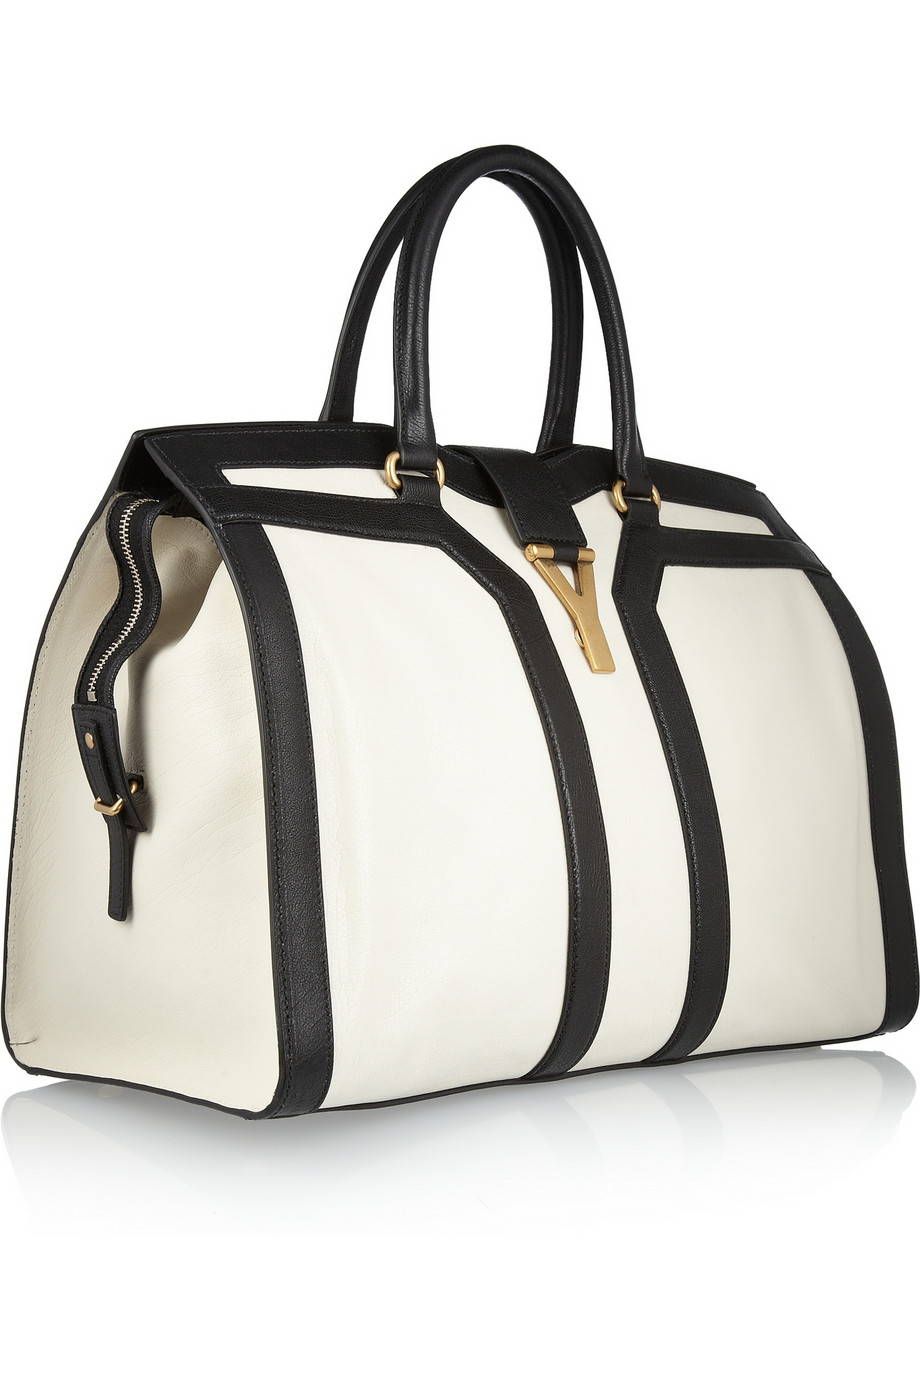 Saint laurent Large Cabas Chyc Leather Tote in White (black) | Lyst  